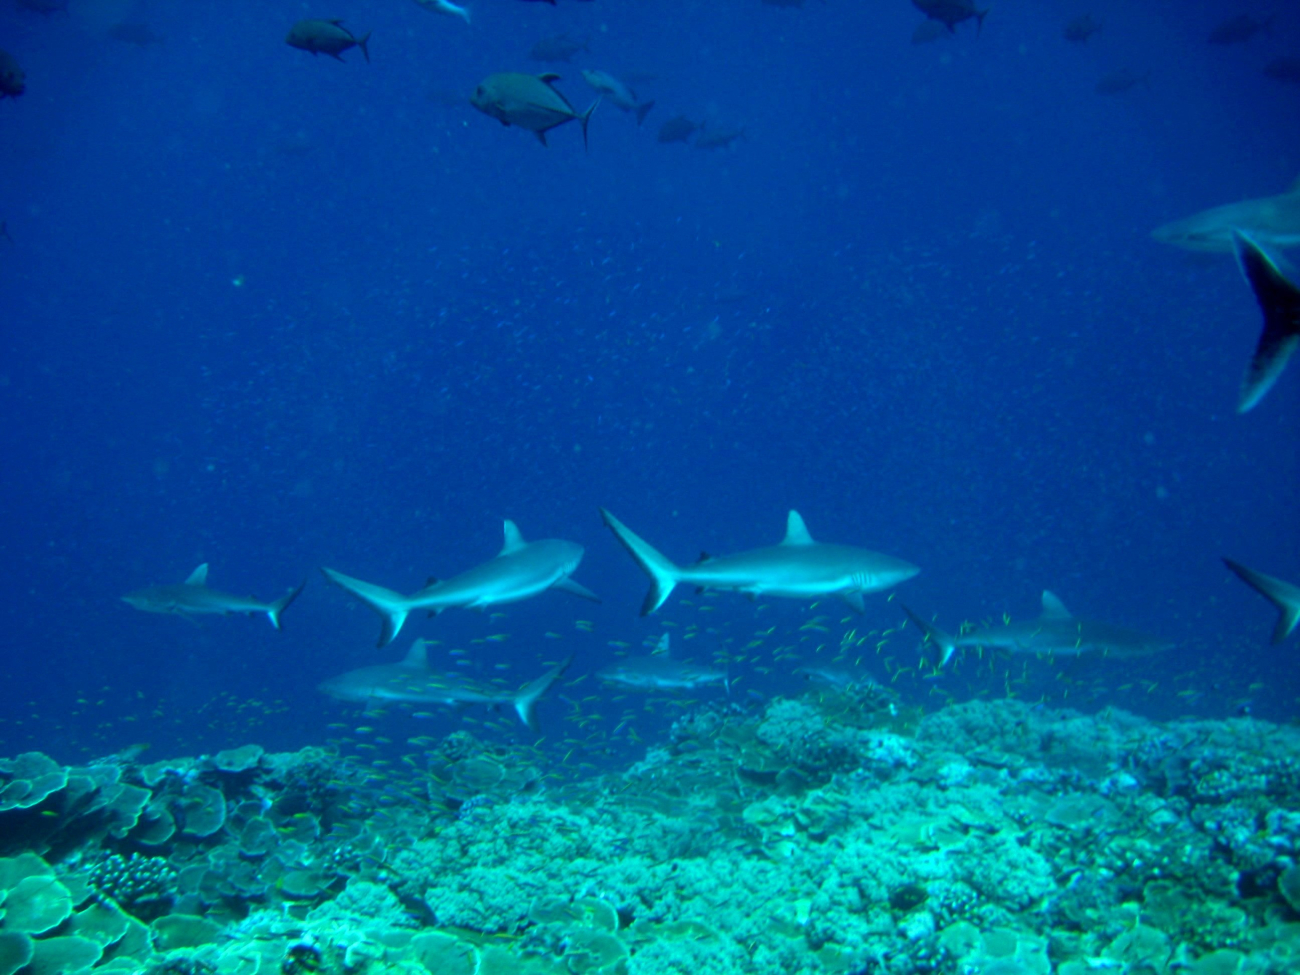 Giant trevally and gray reef sharks over reef